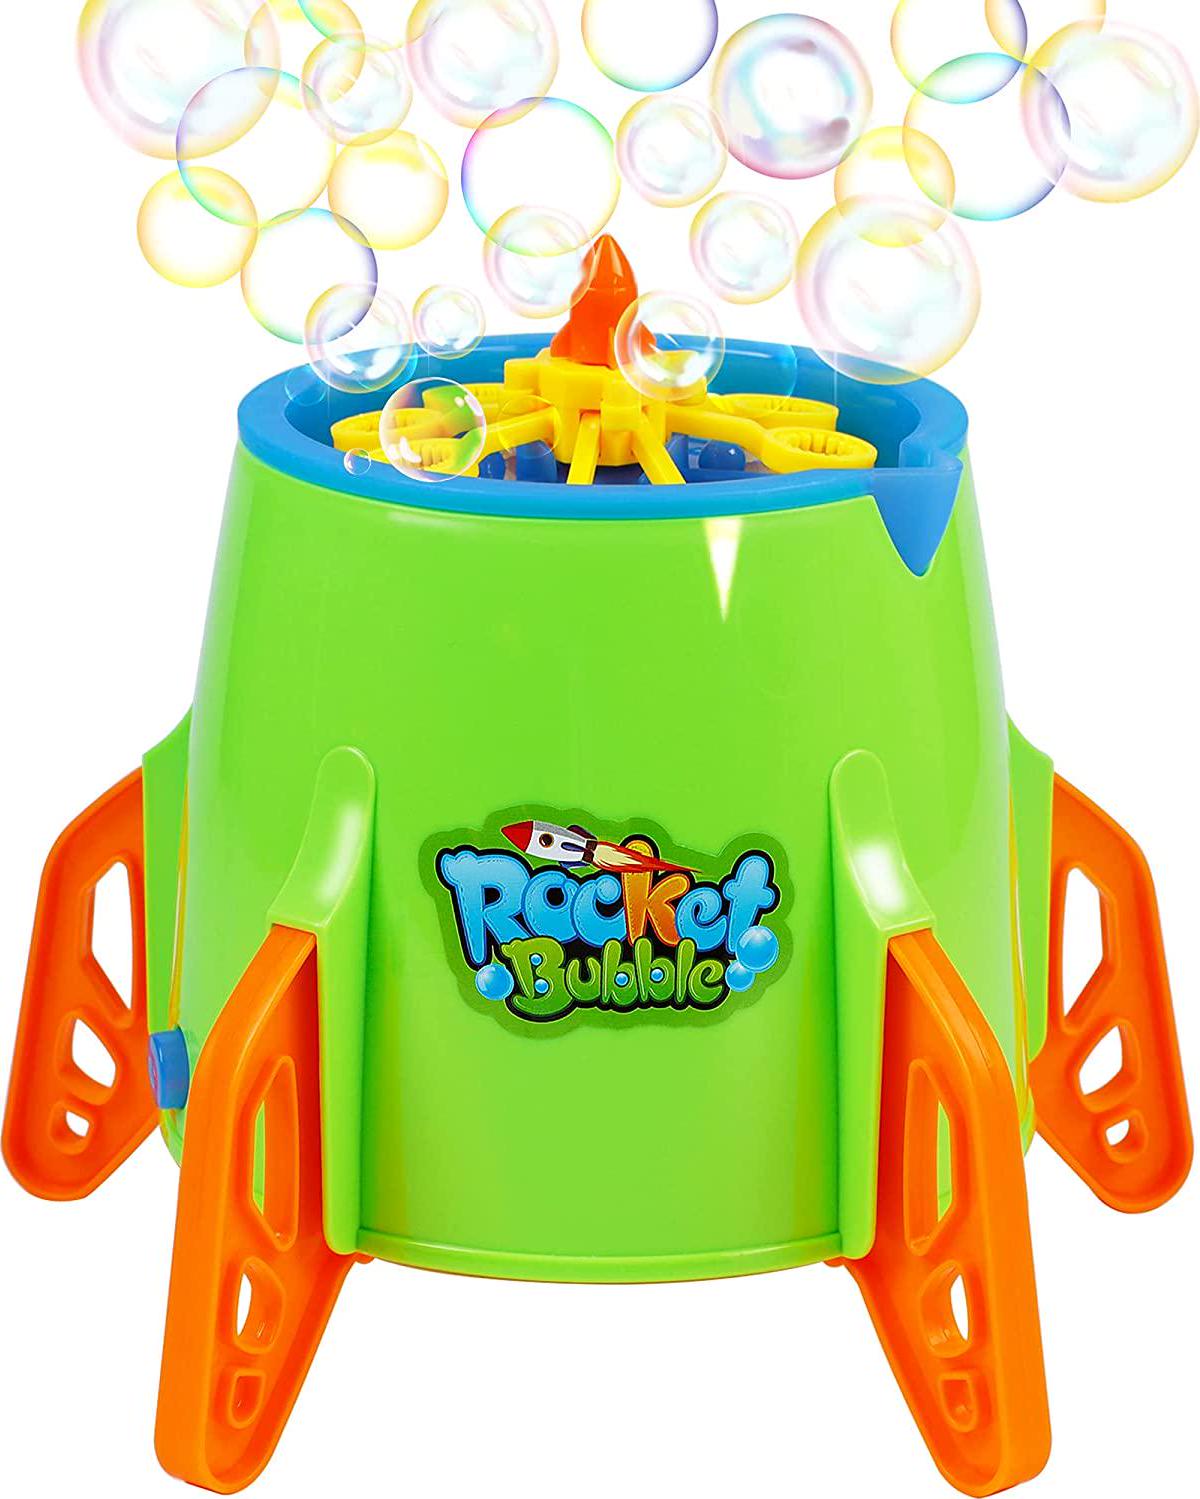 Lulu Home, Lulu Home Bubble Machine, Automatic Space Rocket Bubble Blower for Toddlers Kids Girls Boys, Blowing 2500+ Bubbles Per Minute Accompanied with Music and Lights